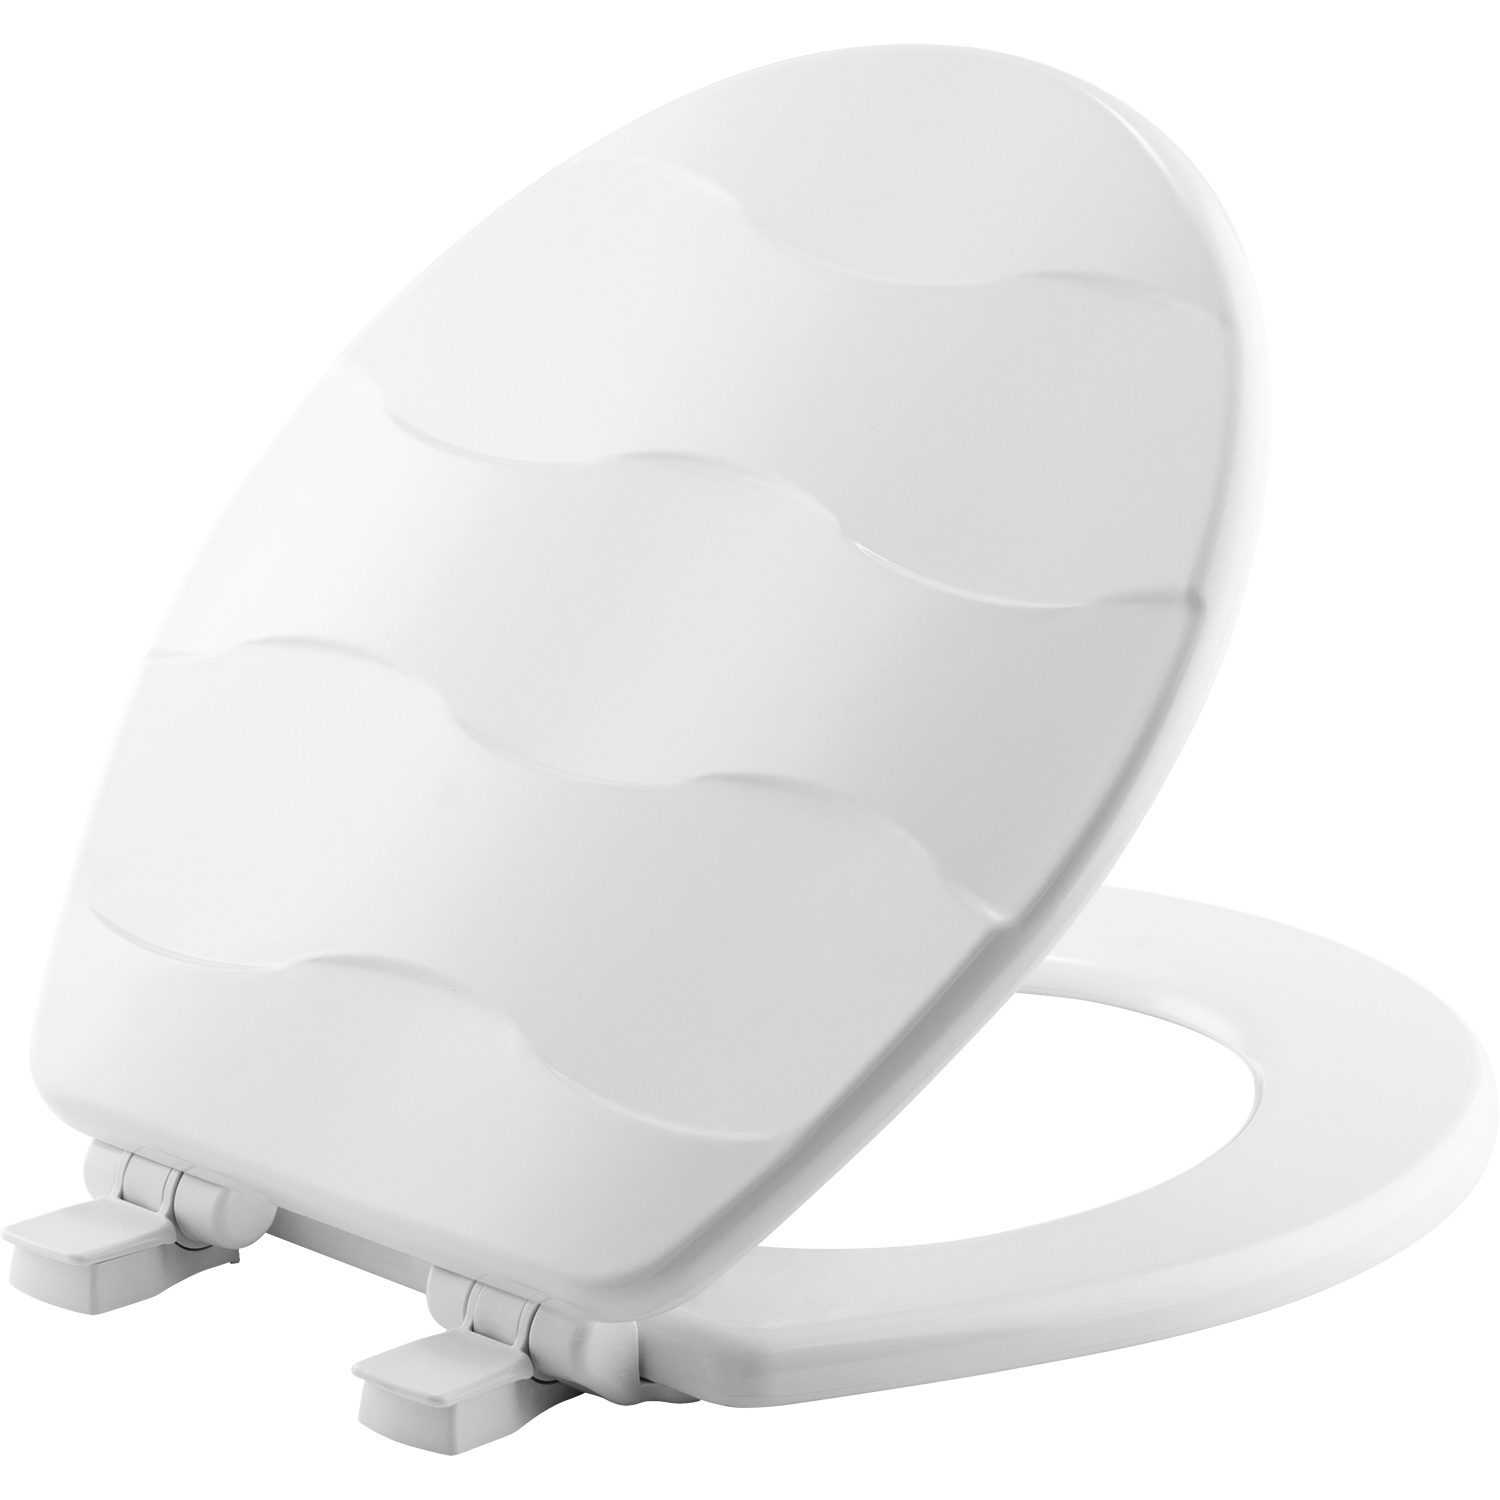 Mayfair 33SLOW 000 Toilet Seat, Round, Wood, White, Easy Clean and Change Hinge